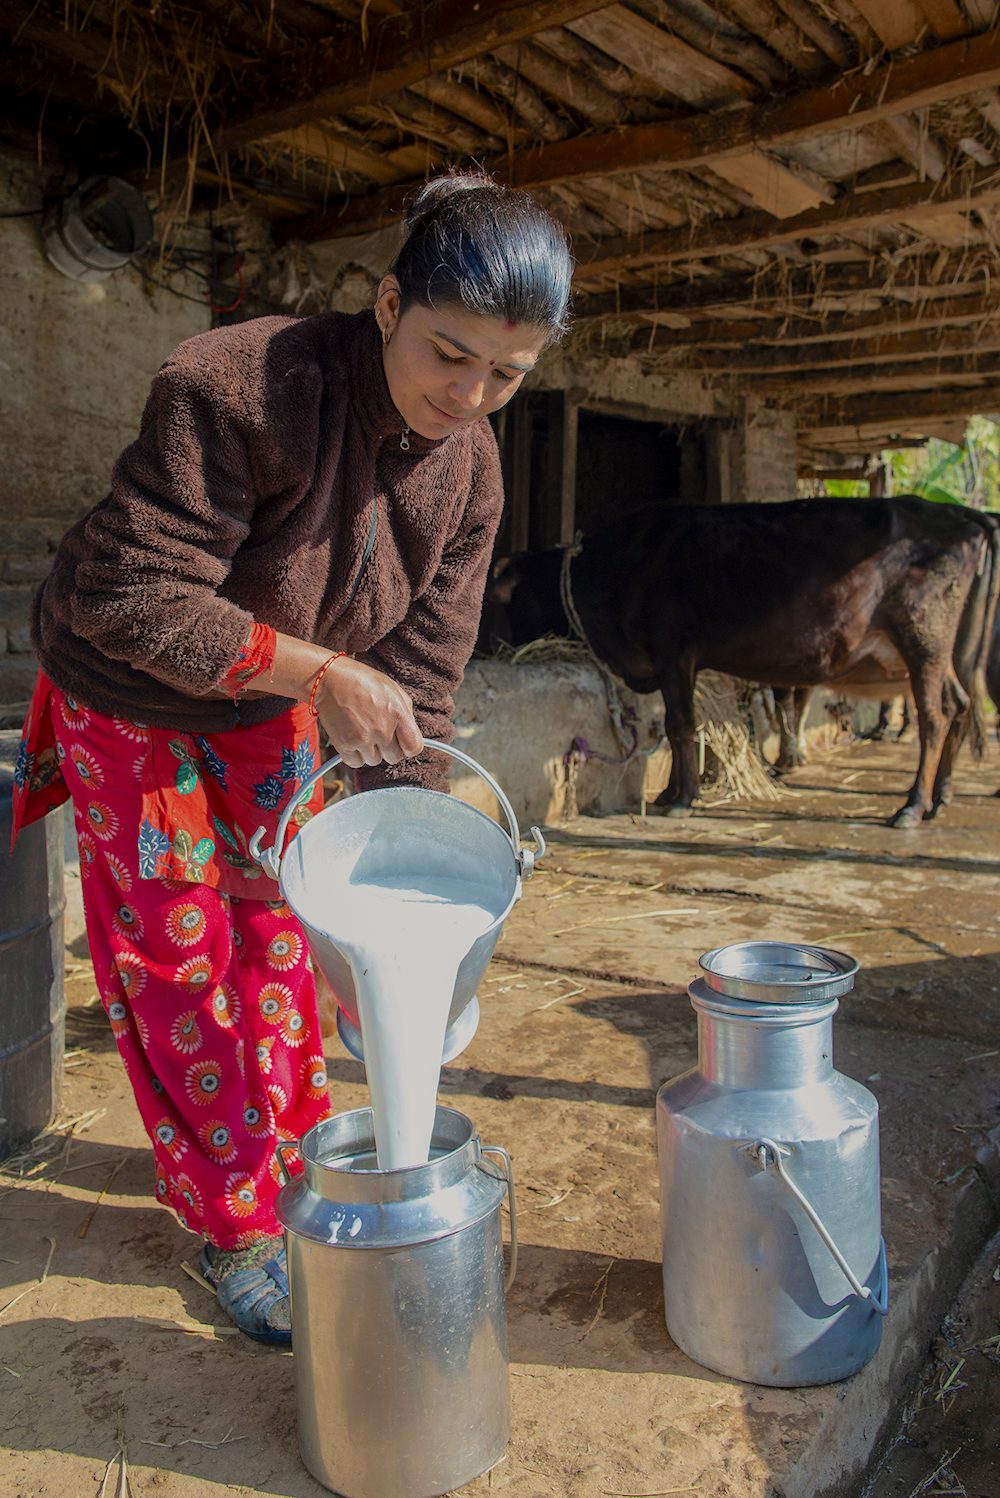 A Nepalese woman pours milk into a container.